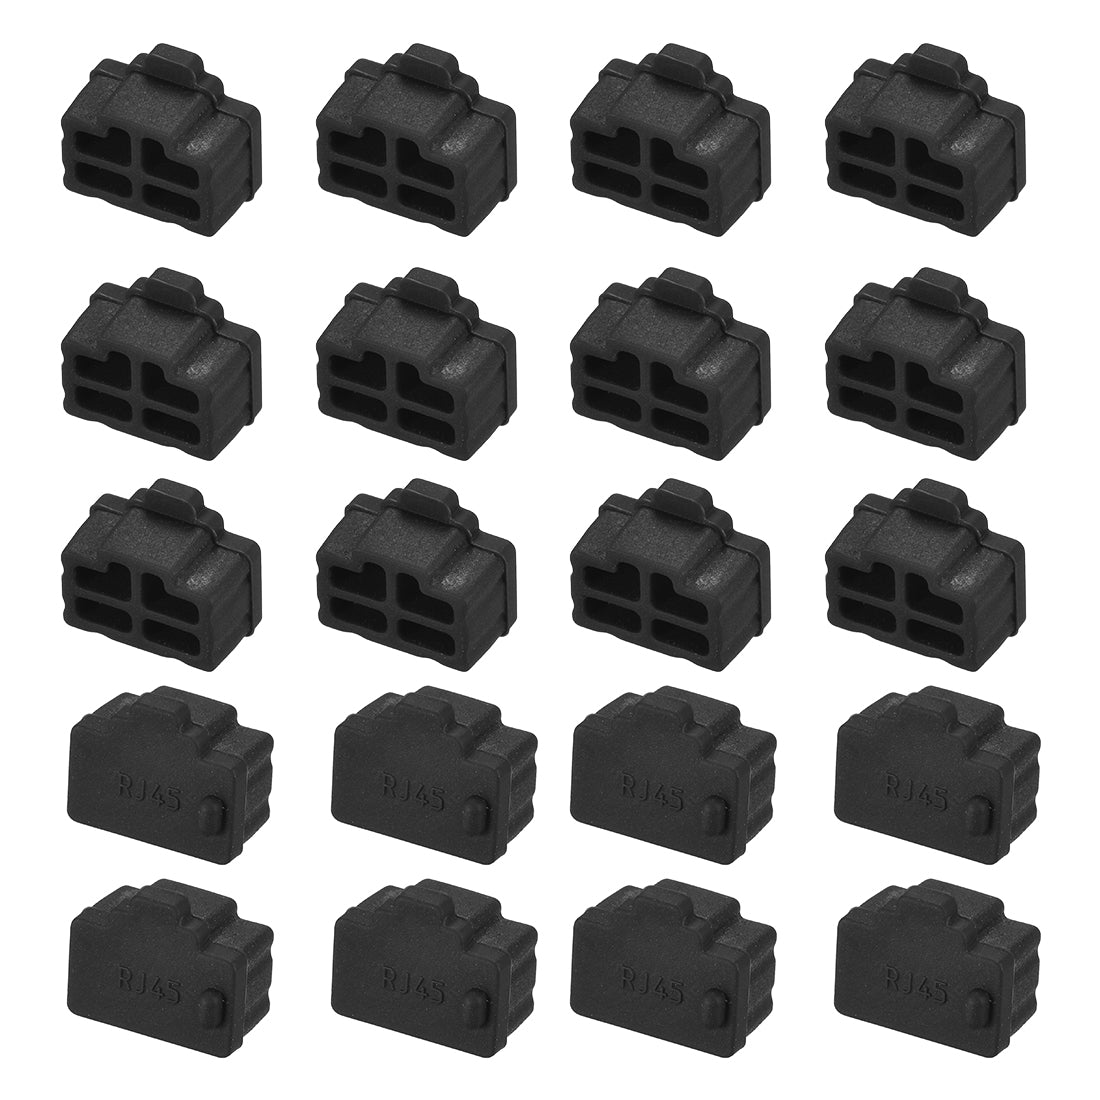 uxcell Uxcell Silicone Ethernet Hub Port RJ45 Anti-Dust Stopper Cap Cover Black 20pcs